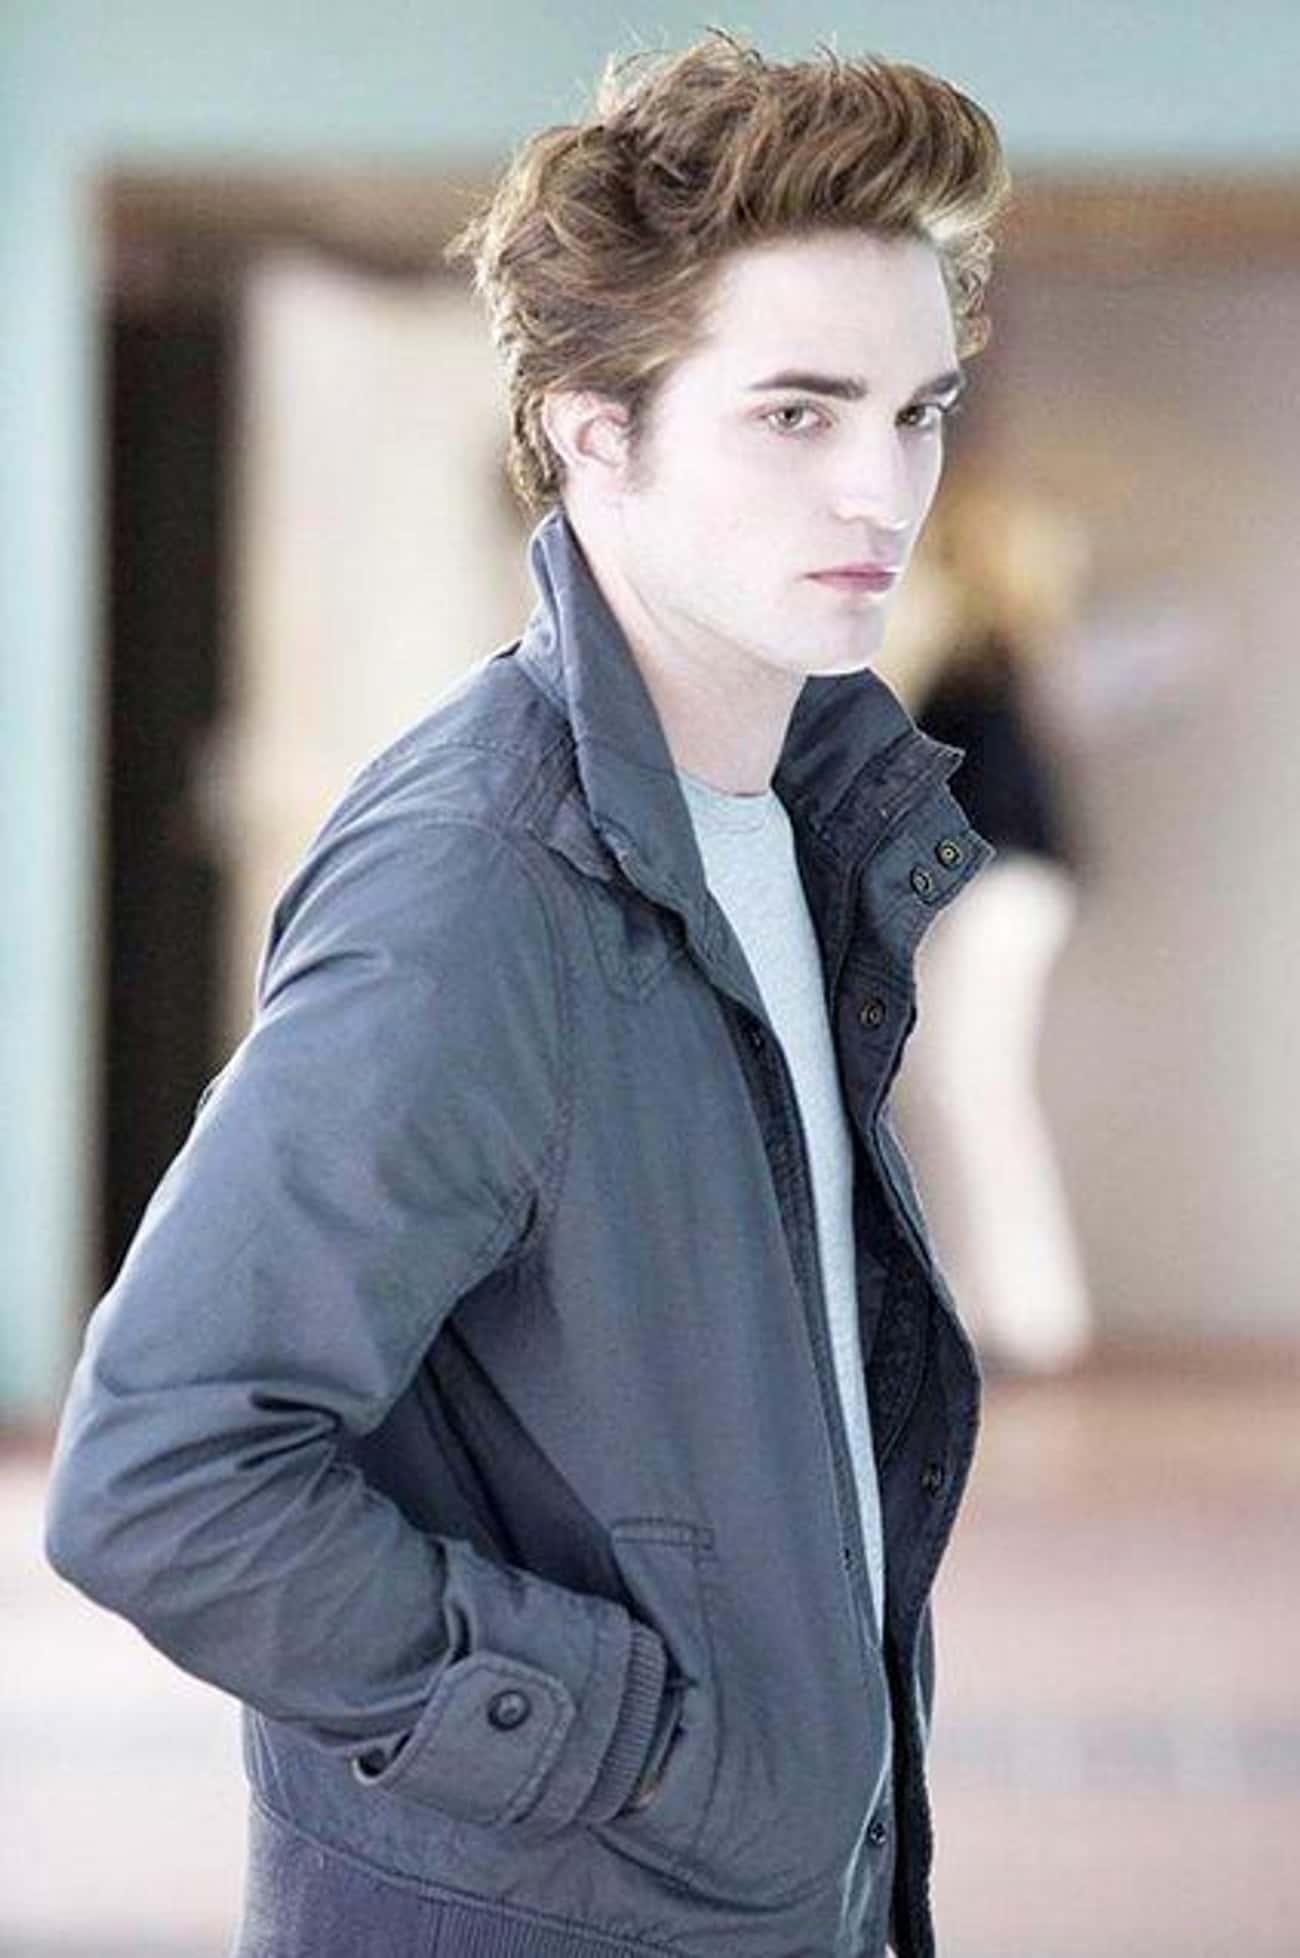 Robert Pattinson Would Mindlessly Hate &#34;Twilight&#34; If He Didn&#39;t Star In The Films